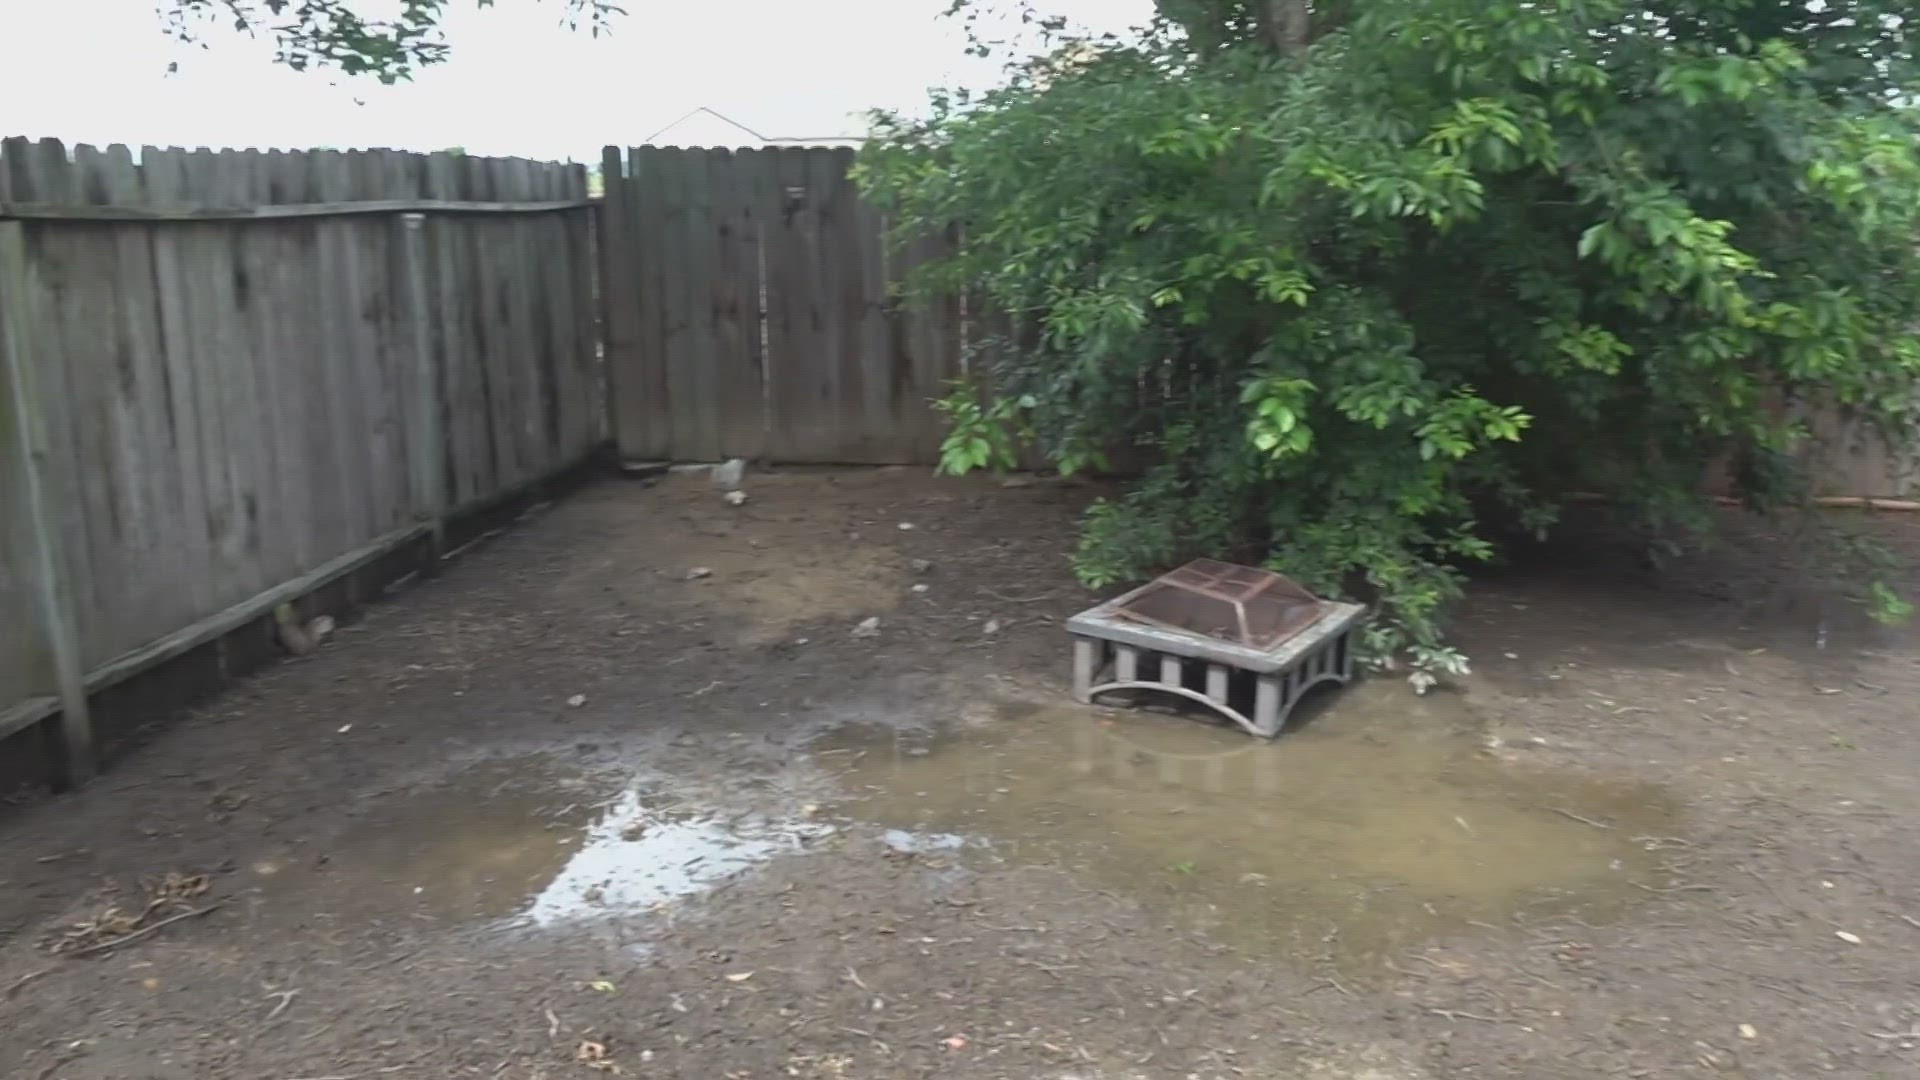 Continuous development around a suburban street is causing drainage to flood nearby residents' backyards.